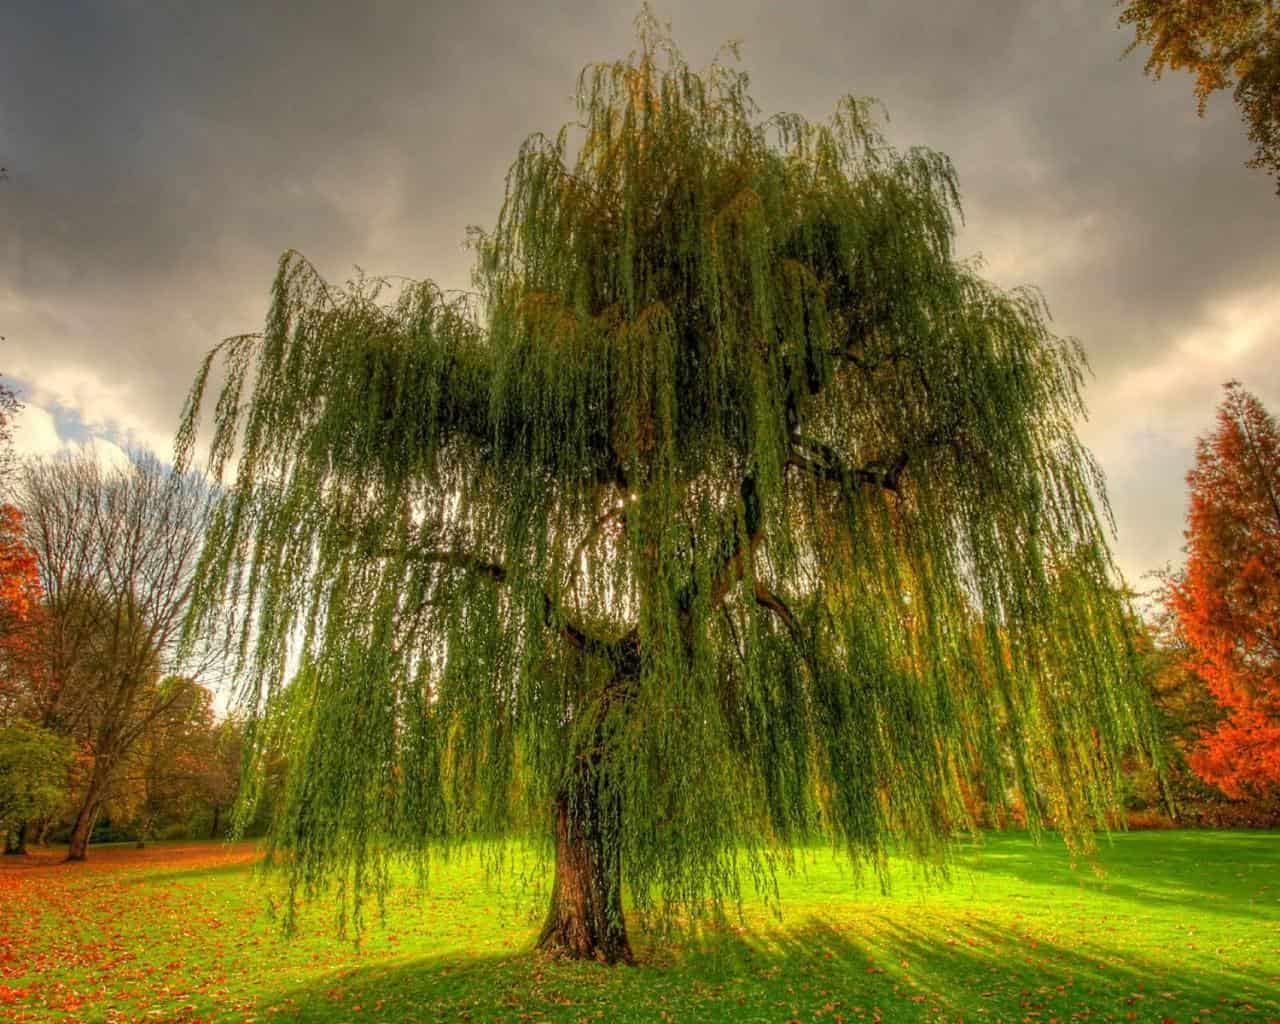 7 Fast Growing Trees For Ultimate Privacy In Your Garden - Weeping Willow